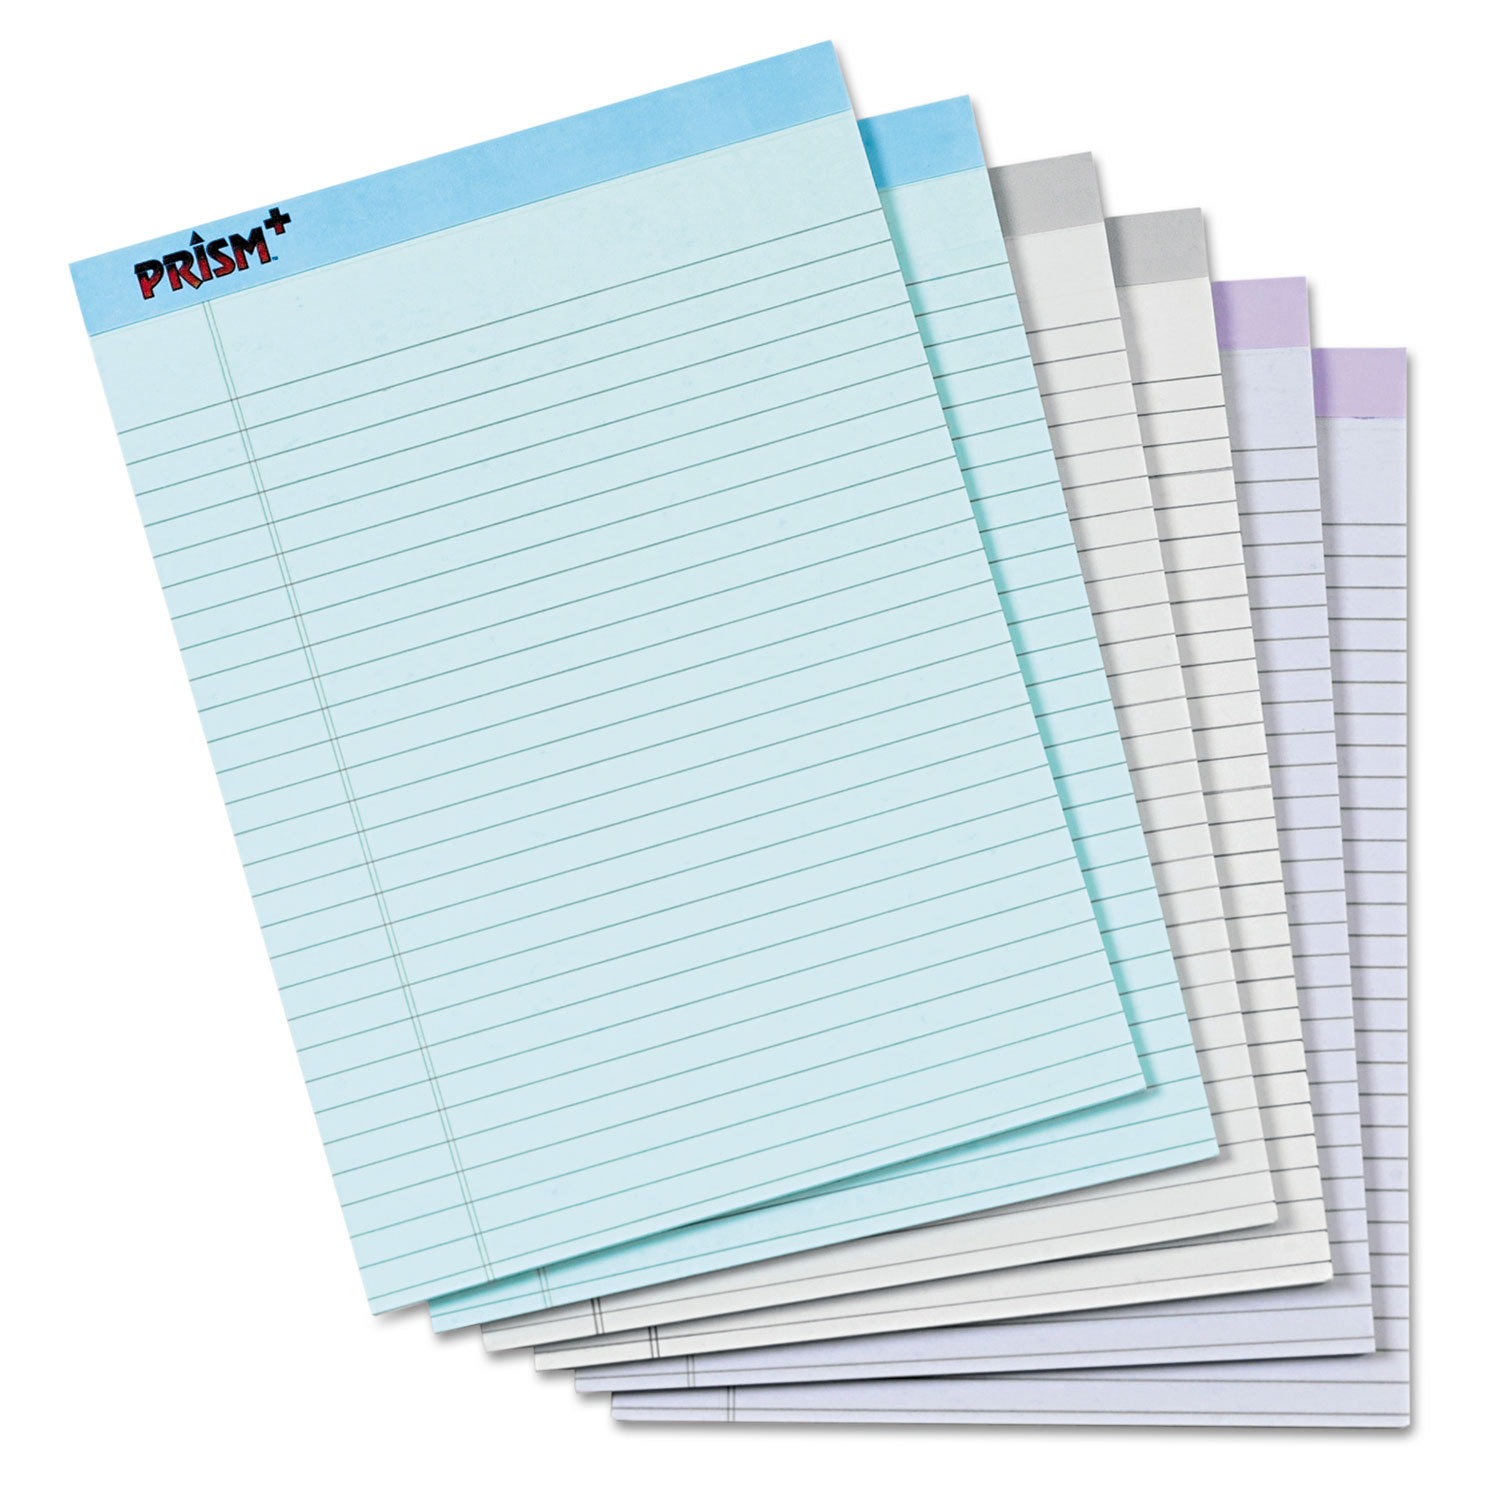  TOPS 63116 Prism + Colored Writing Pad, Wide/Legal Rule, 8.5 x 11.75, Assorted Pastel Sheet Colors, 50 Sheets, 6/Pack (TOP63116) 